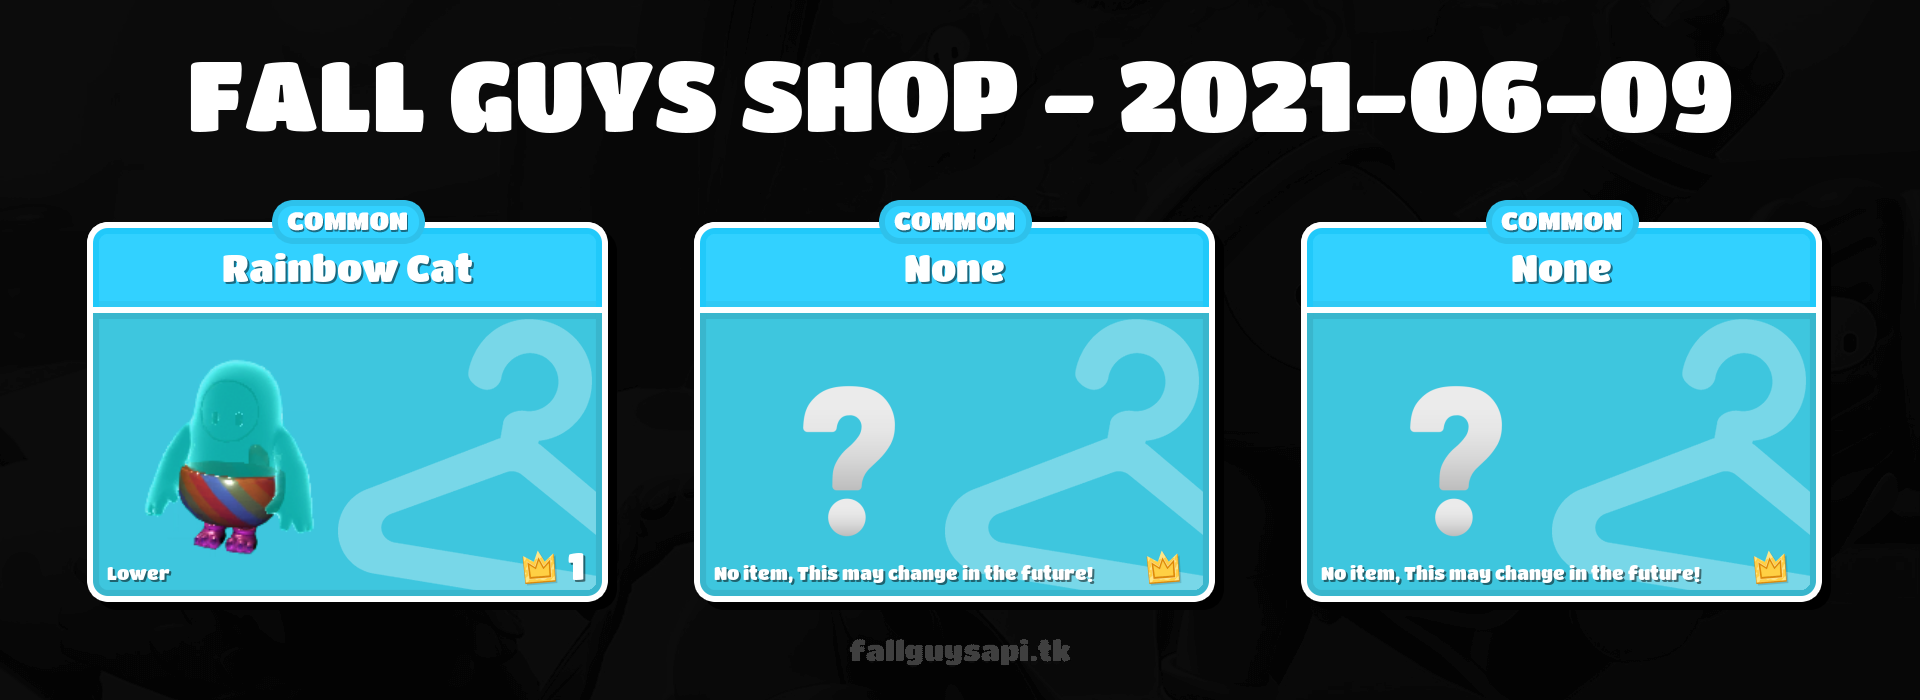 Fall Guys: Ultimate Knockout [S4] Featured shop - What's on sale? - Jun 09 - Jun 12